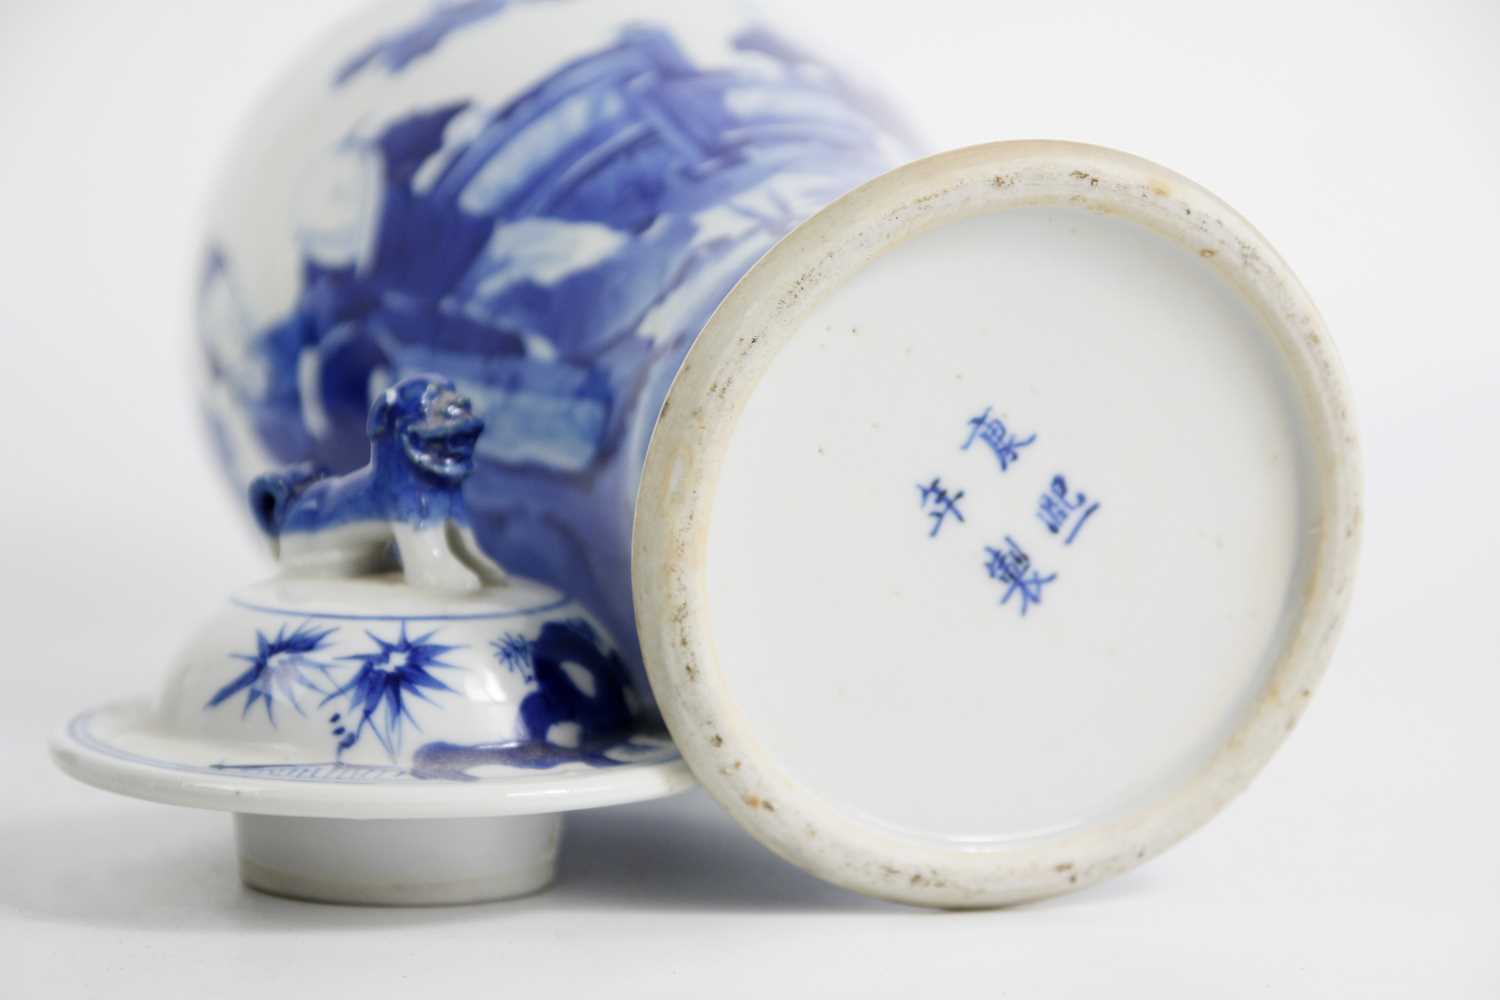 A Chinese blue and white porcelain vase and cover, Qing Dynasty, late 19th century. - Image 12 of 21